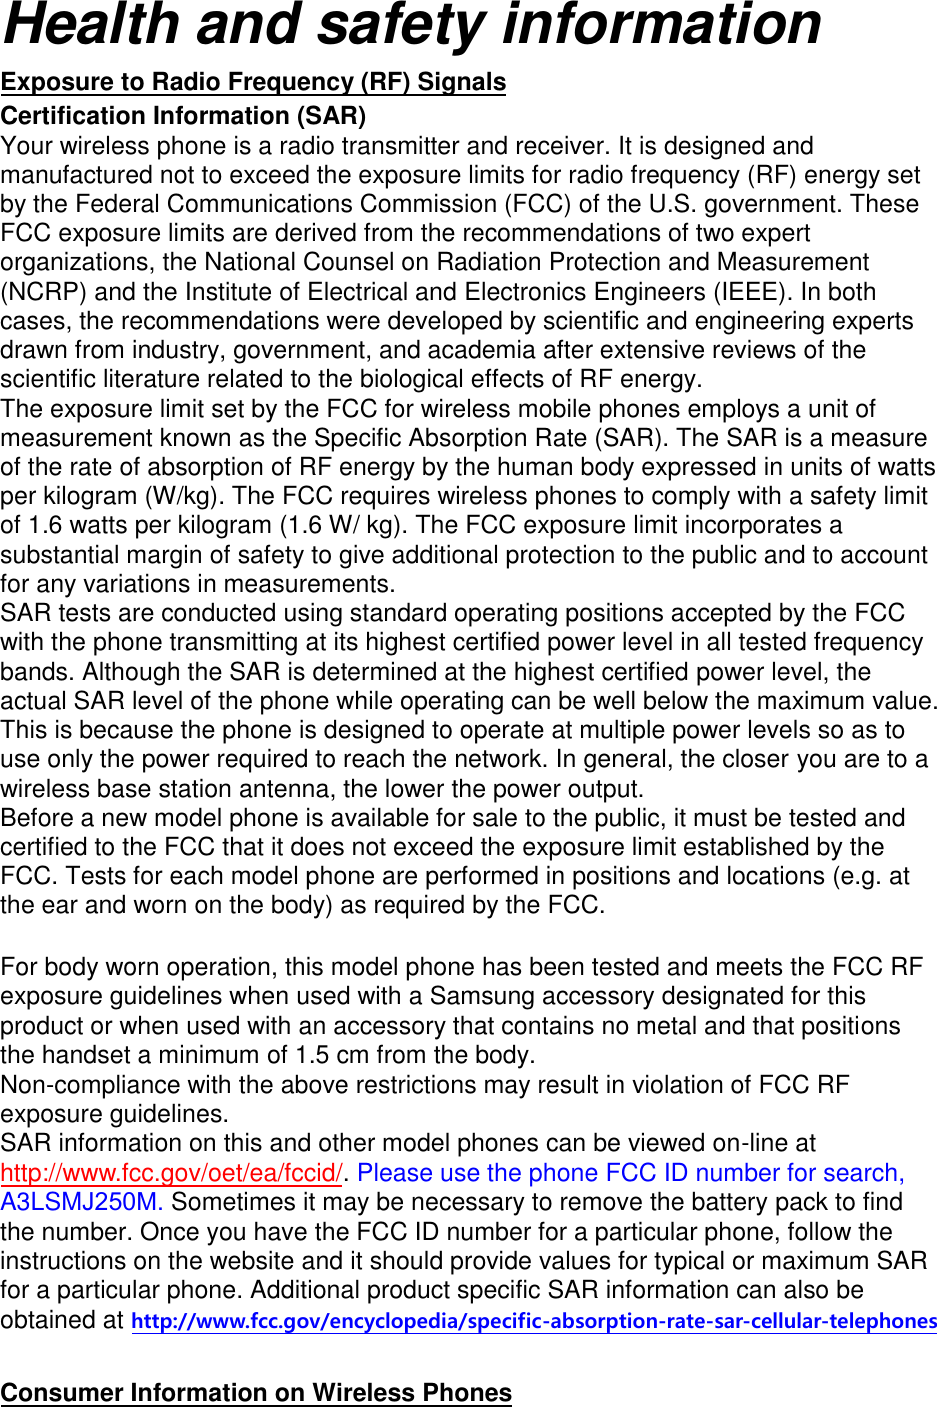 Health and safety information Exposure to Radio Frequency (RF) Signals Certification Information (SAR) Your wireless phone is a radio transmitter and receiver. It is designed and manufactured not to exceed the exposure limits for radio frequency (RF) energy set by the Federal Communications Commission (FCC) of the U.S. government. These FCC exposure limits are derived from the recommendations of two expert organizations, the National Counsel on Radiation Protection and Measurement (NCRP) and the Institute of Electrical and Electronics Engineers (IEEE). In both cases, the recommendations were developed by scientific and engineering experts drawn from industry, government, and academia after extensive reviews of the scientific literature related to the biological effects of RF energy. The exposure limit set by the FCC for wireless mobile phones employs a unit of measurement known as the Specific Absorption Rate (SAR). The SAR is a measure of the rate of absorption of RF energy by the human body expressed in units of watts per kilogram (W/kg). The FCC requires wireless phones to comply with a safety limit of 1.6 watts per kilogram (1.6 W/ kg). The FCC exposure limit incorporates a substantial margin of safety to give additional protection to the public and to account for any variations in measurements. SAR tests are conducted using standard operating positions accepted by the FCC with the phone transmitting at its highest certified power level in all tested frequency bands. Although the SAR is determined at the highest certified power level, the actual SAR level of the phone while operating can be well below the maximum value. This is because the phone is designed to operate at multiple power levels so as to use only the power required to reach the network. In general, the closer you are to a wireless base station antenna, the lower the power output. Before a new model phone is available for sale to the public, it must be tested and certified to the FCC that it does not exceed the exposure limit established by the FCC. Tests for each model phone are performed in positions and locations (e.g. at the ear and worn on the body) as required by the FCC.    For body worn operation, this model phone has been tested and meets the FCC RF exposure guidelines when used with a Samsung accessory designated for this product or when used with an accessory that contains no metal and that positions the handset a minimum of 1.5 cm from the body.   Non-compliance with the above restrictions may result in violation of FCC RF exposure guidelines. SAR information on this and other model phones can be viewed on-line at http://www.fcc.gov/oet/ea/fccid/. Please use the phone FCC ID number for search, A3LSMJ250M. Sometimes it may be necessary to remove the battery pack to findthe number. Once you have the FCC ID number for a particular phone, follow the instructions on the website and it should provide values for typical or maximum SAR for a particular phone. Additional product specific SAR information can also be obtained at http://www.fcc.gov/encyclopedia/specific-absorption-rate-sar-cellular-telephones Consumer Information on Wireless Phones 